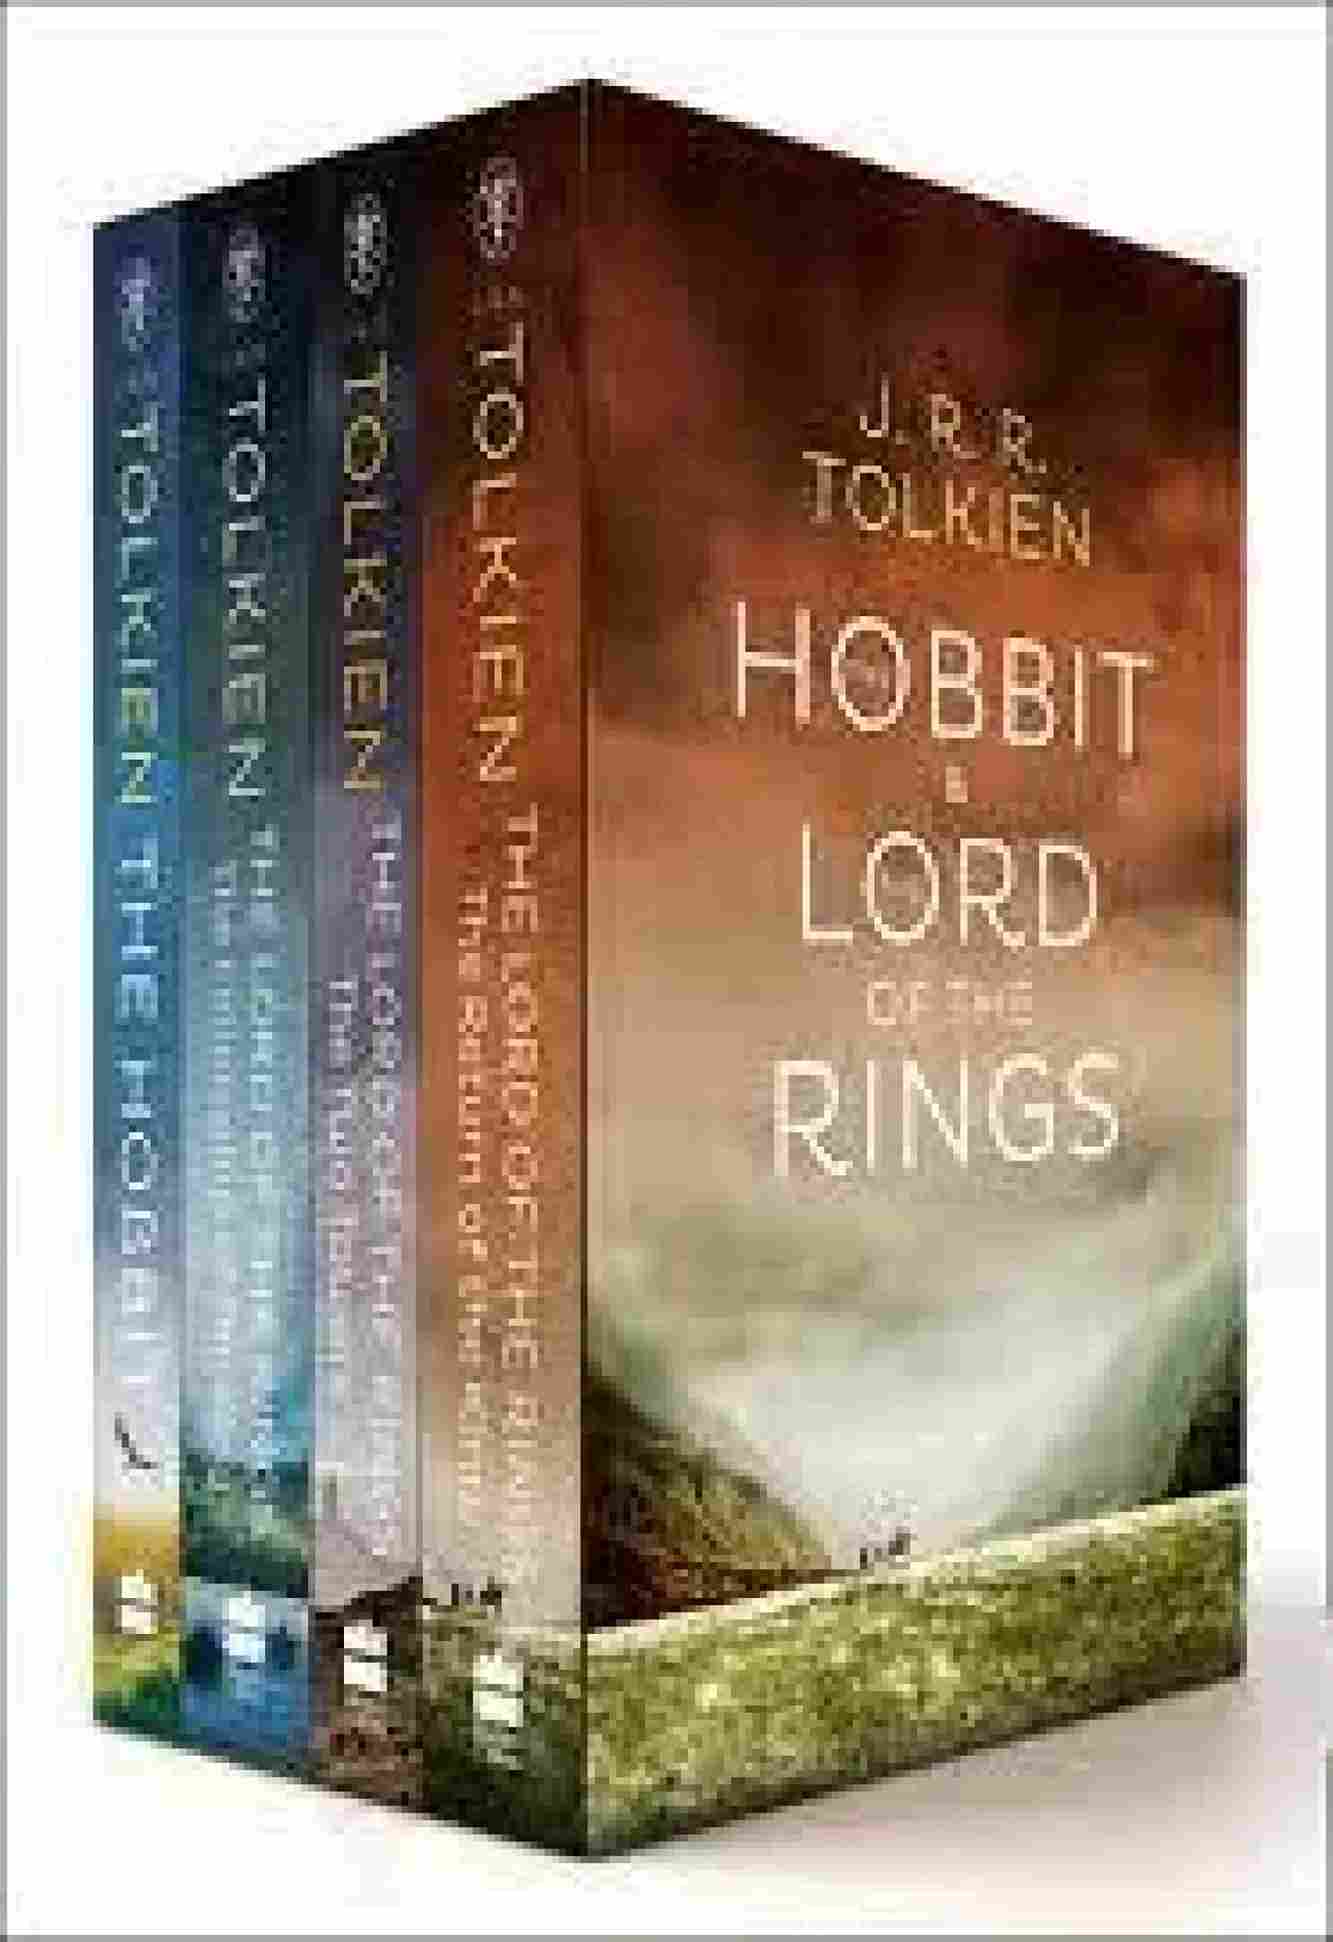 The Hobbit & The Lord of the Rings Boxed Set - J. R. R. Tolkien (Paperback)